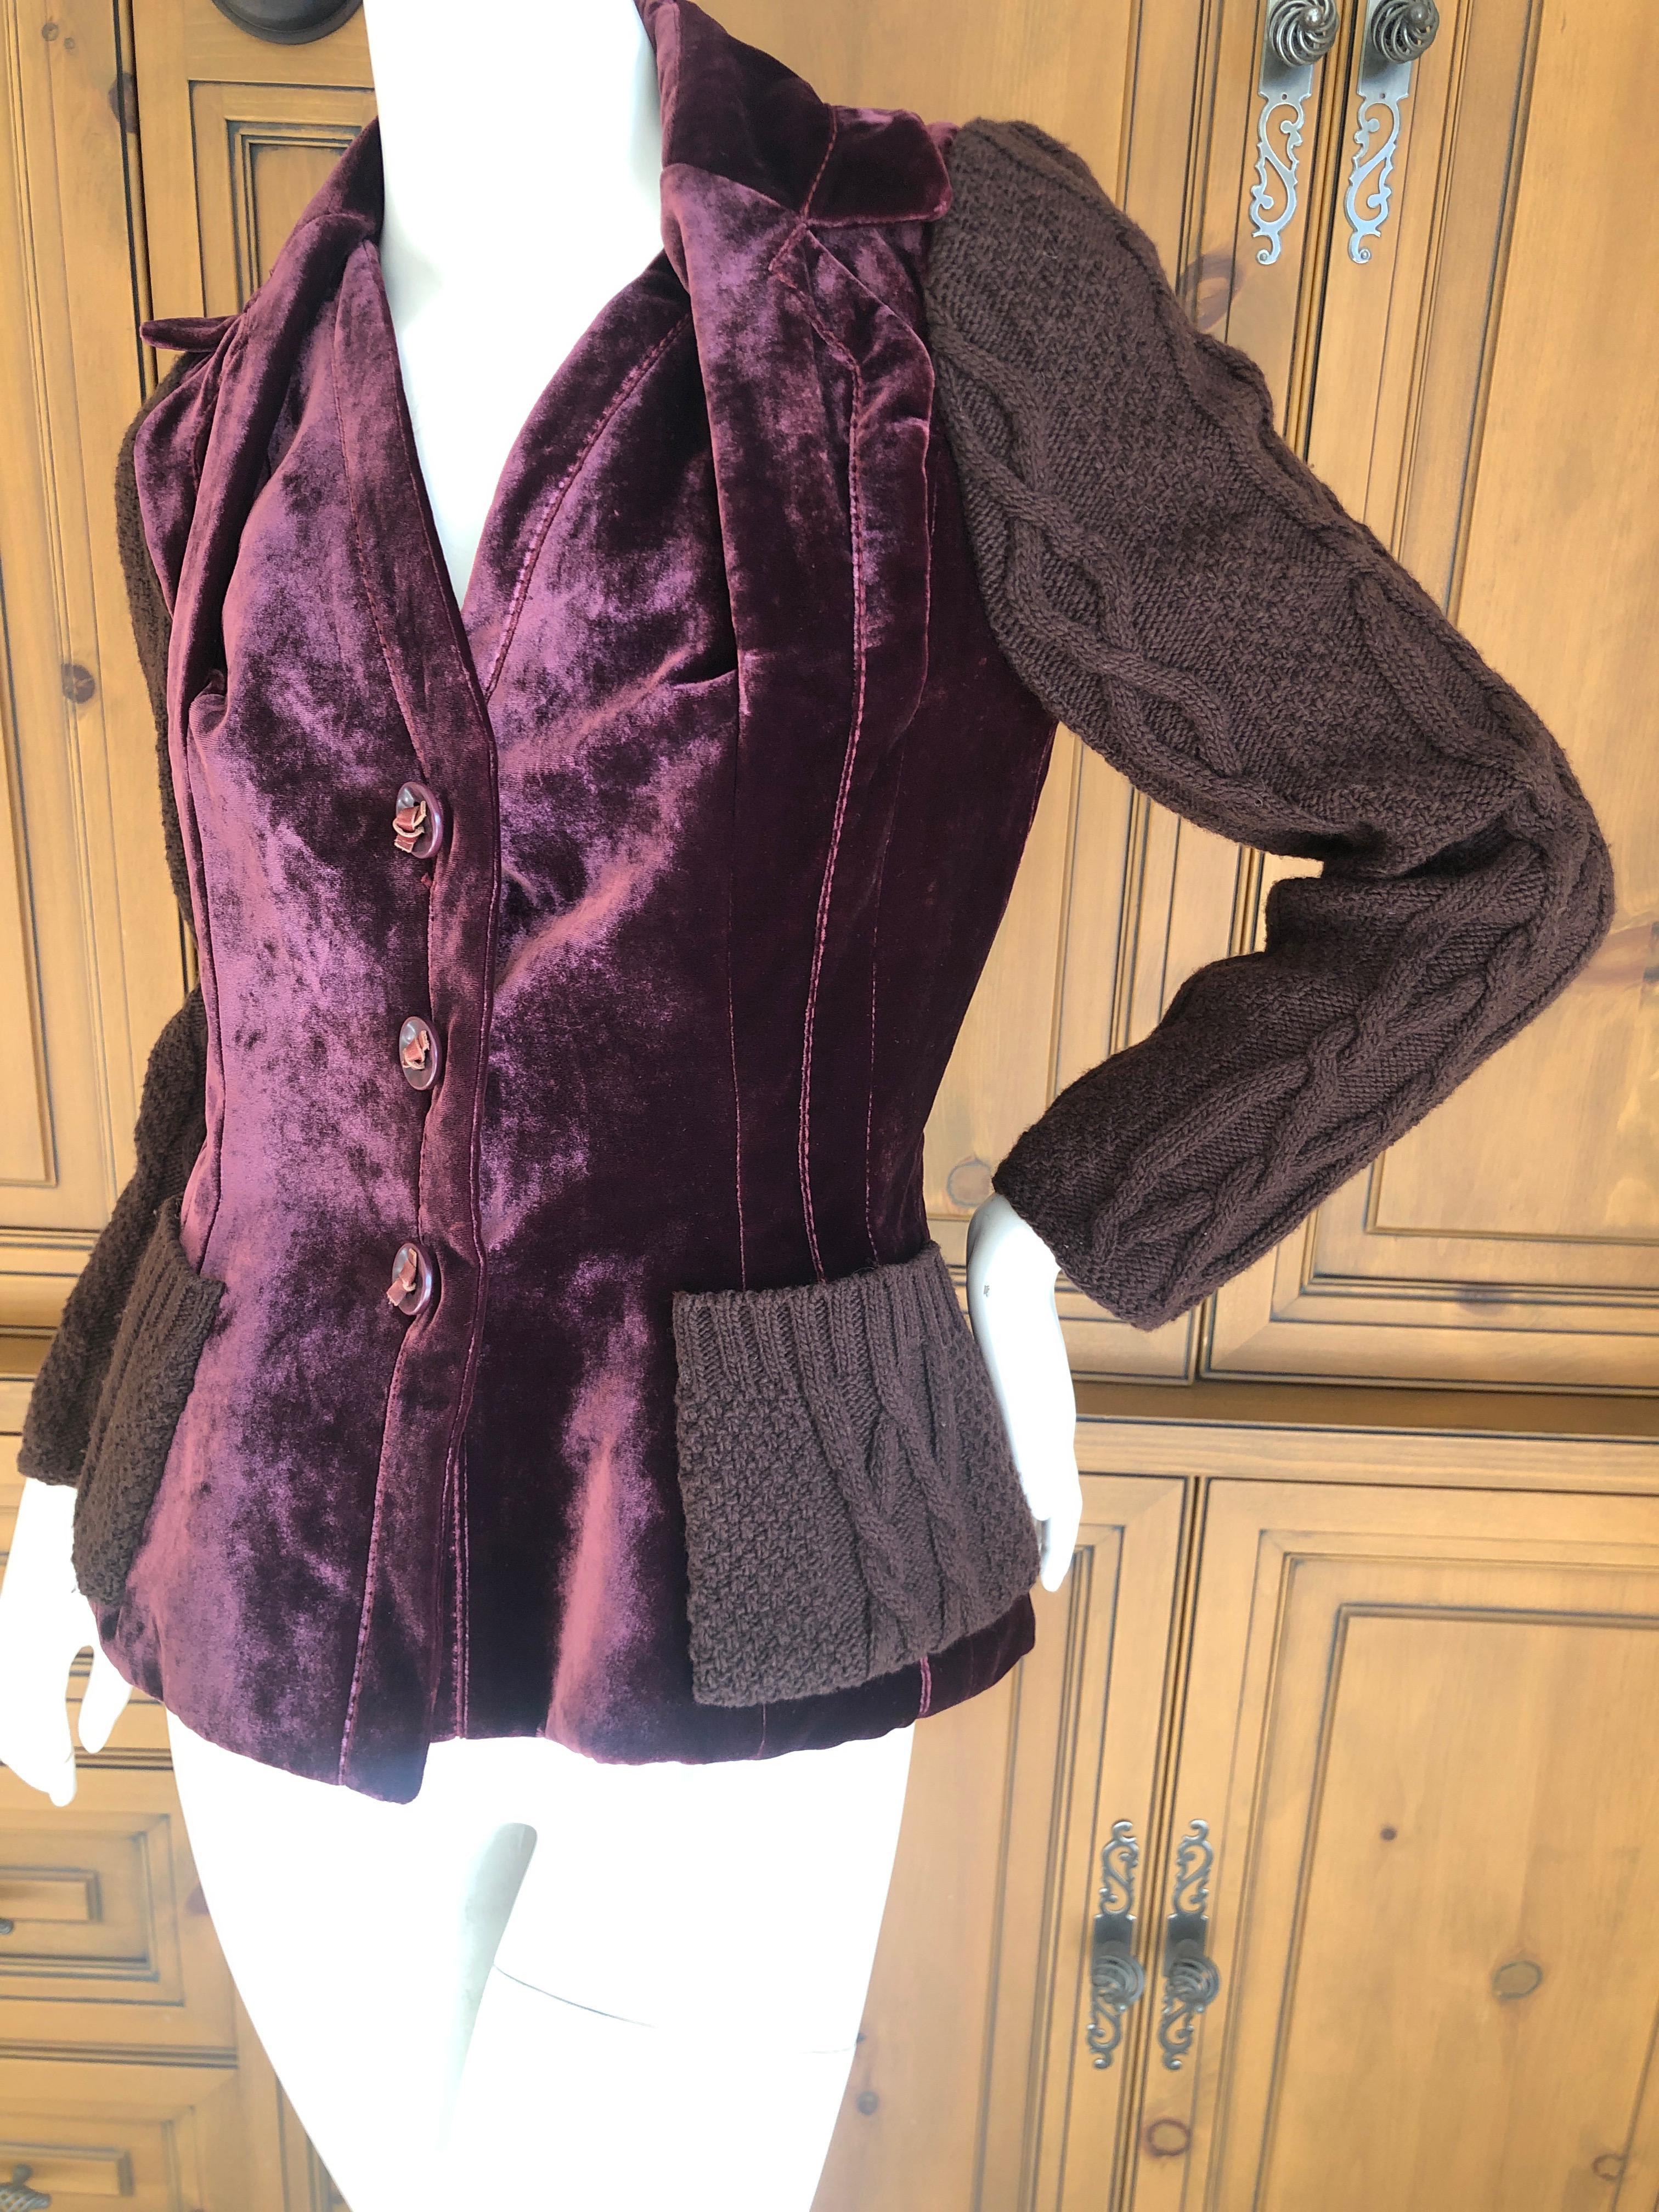 Women's Christian Dior by John Galliano Burgundy Velvet Bar Jacket w Cable Knit Details For Sale